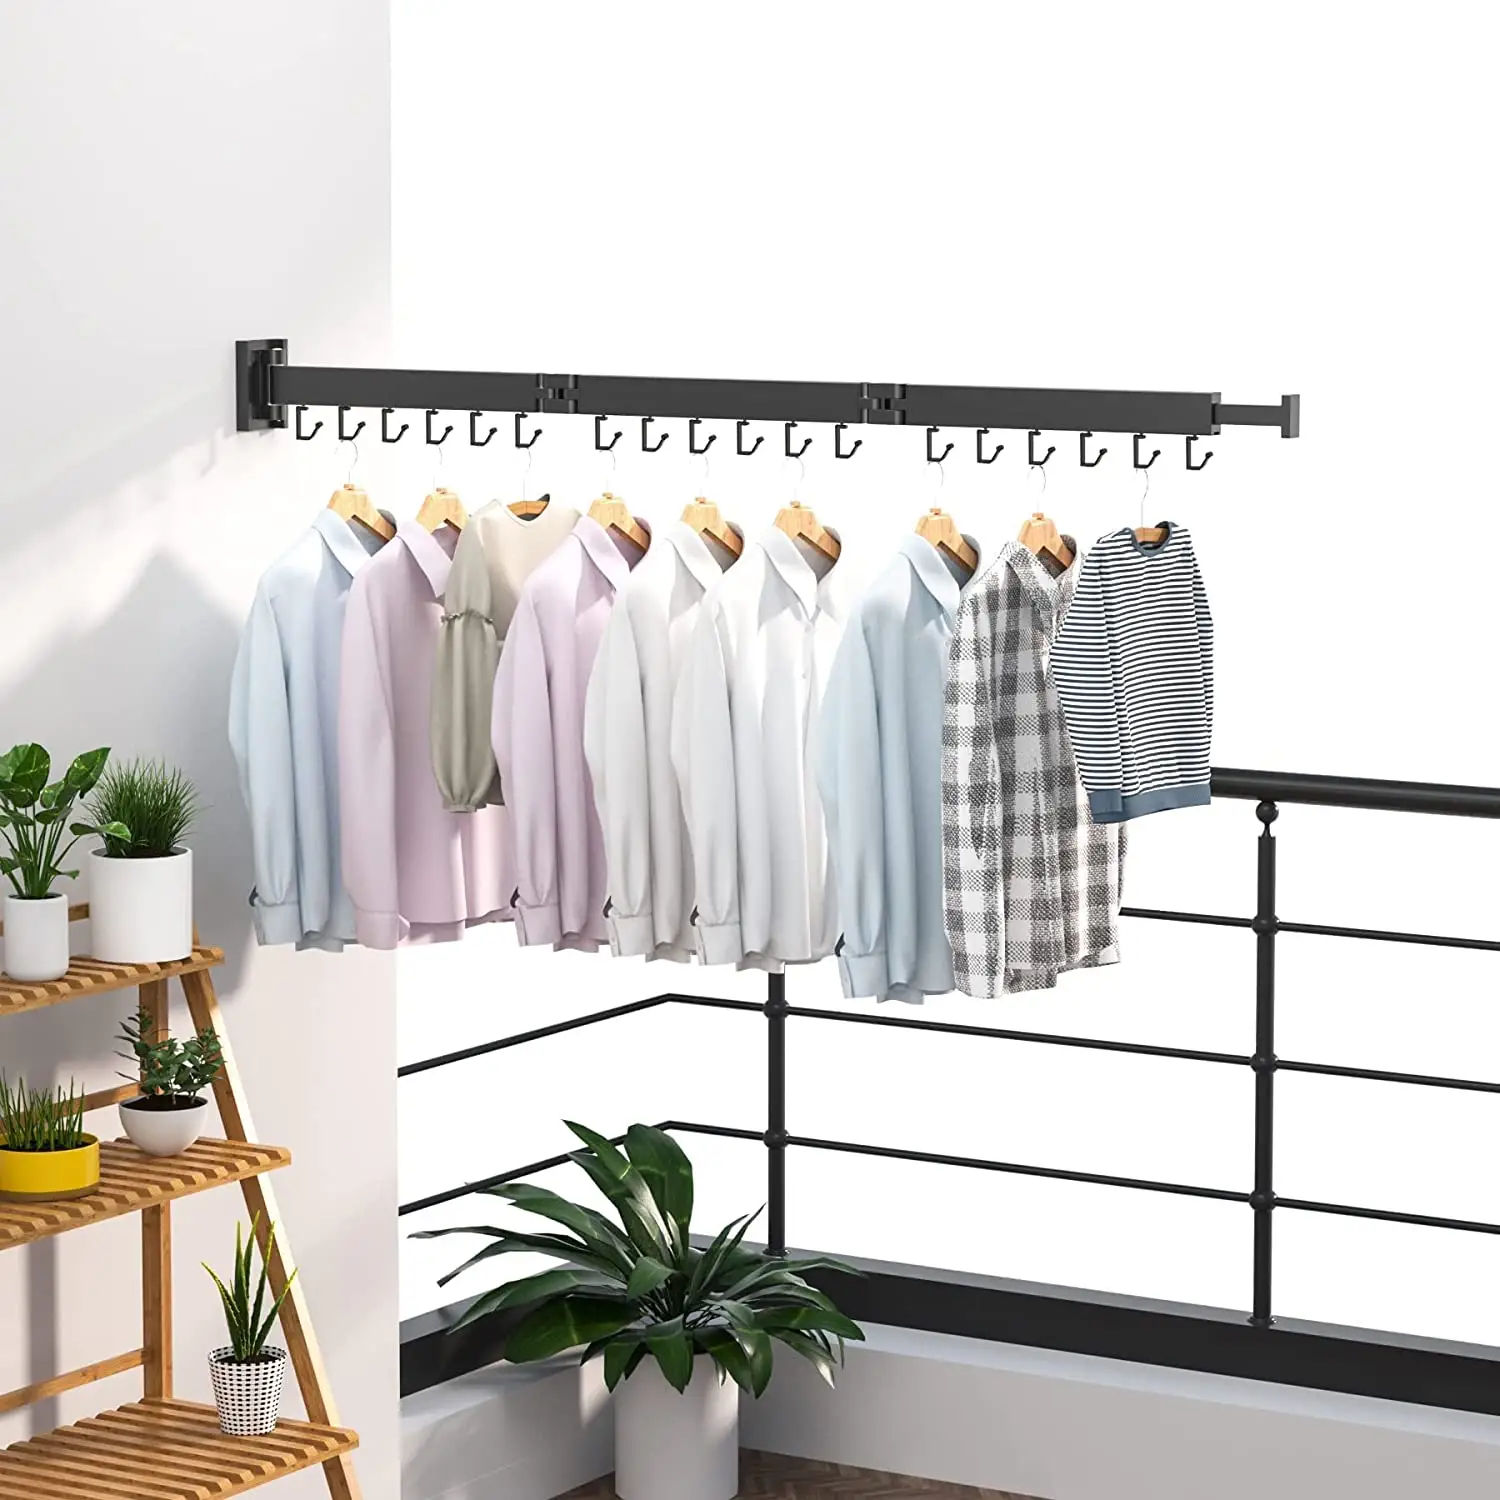 Wall Mounted Rotating Retractable Drying rack Clothes Dry Laundry Clothing Hangers Racks Shelf